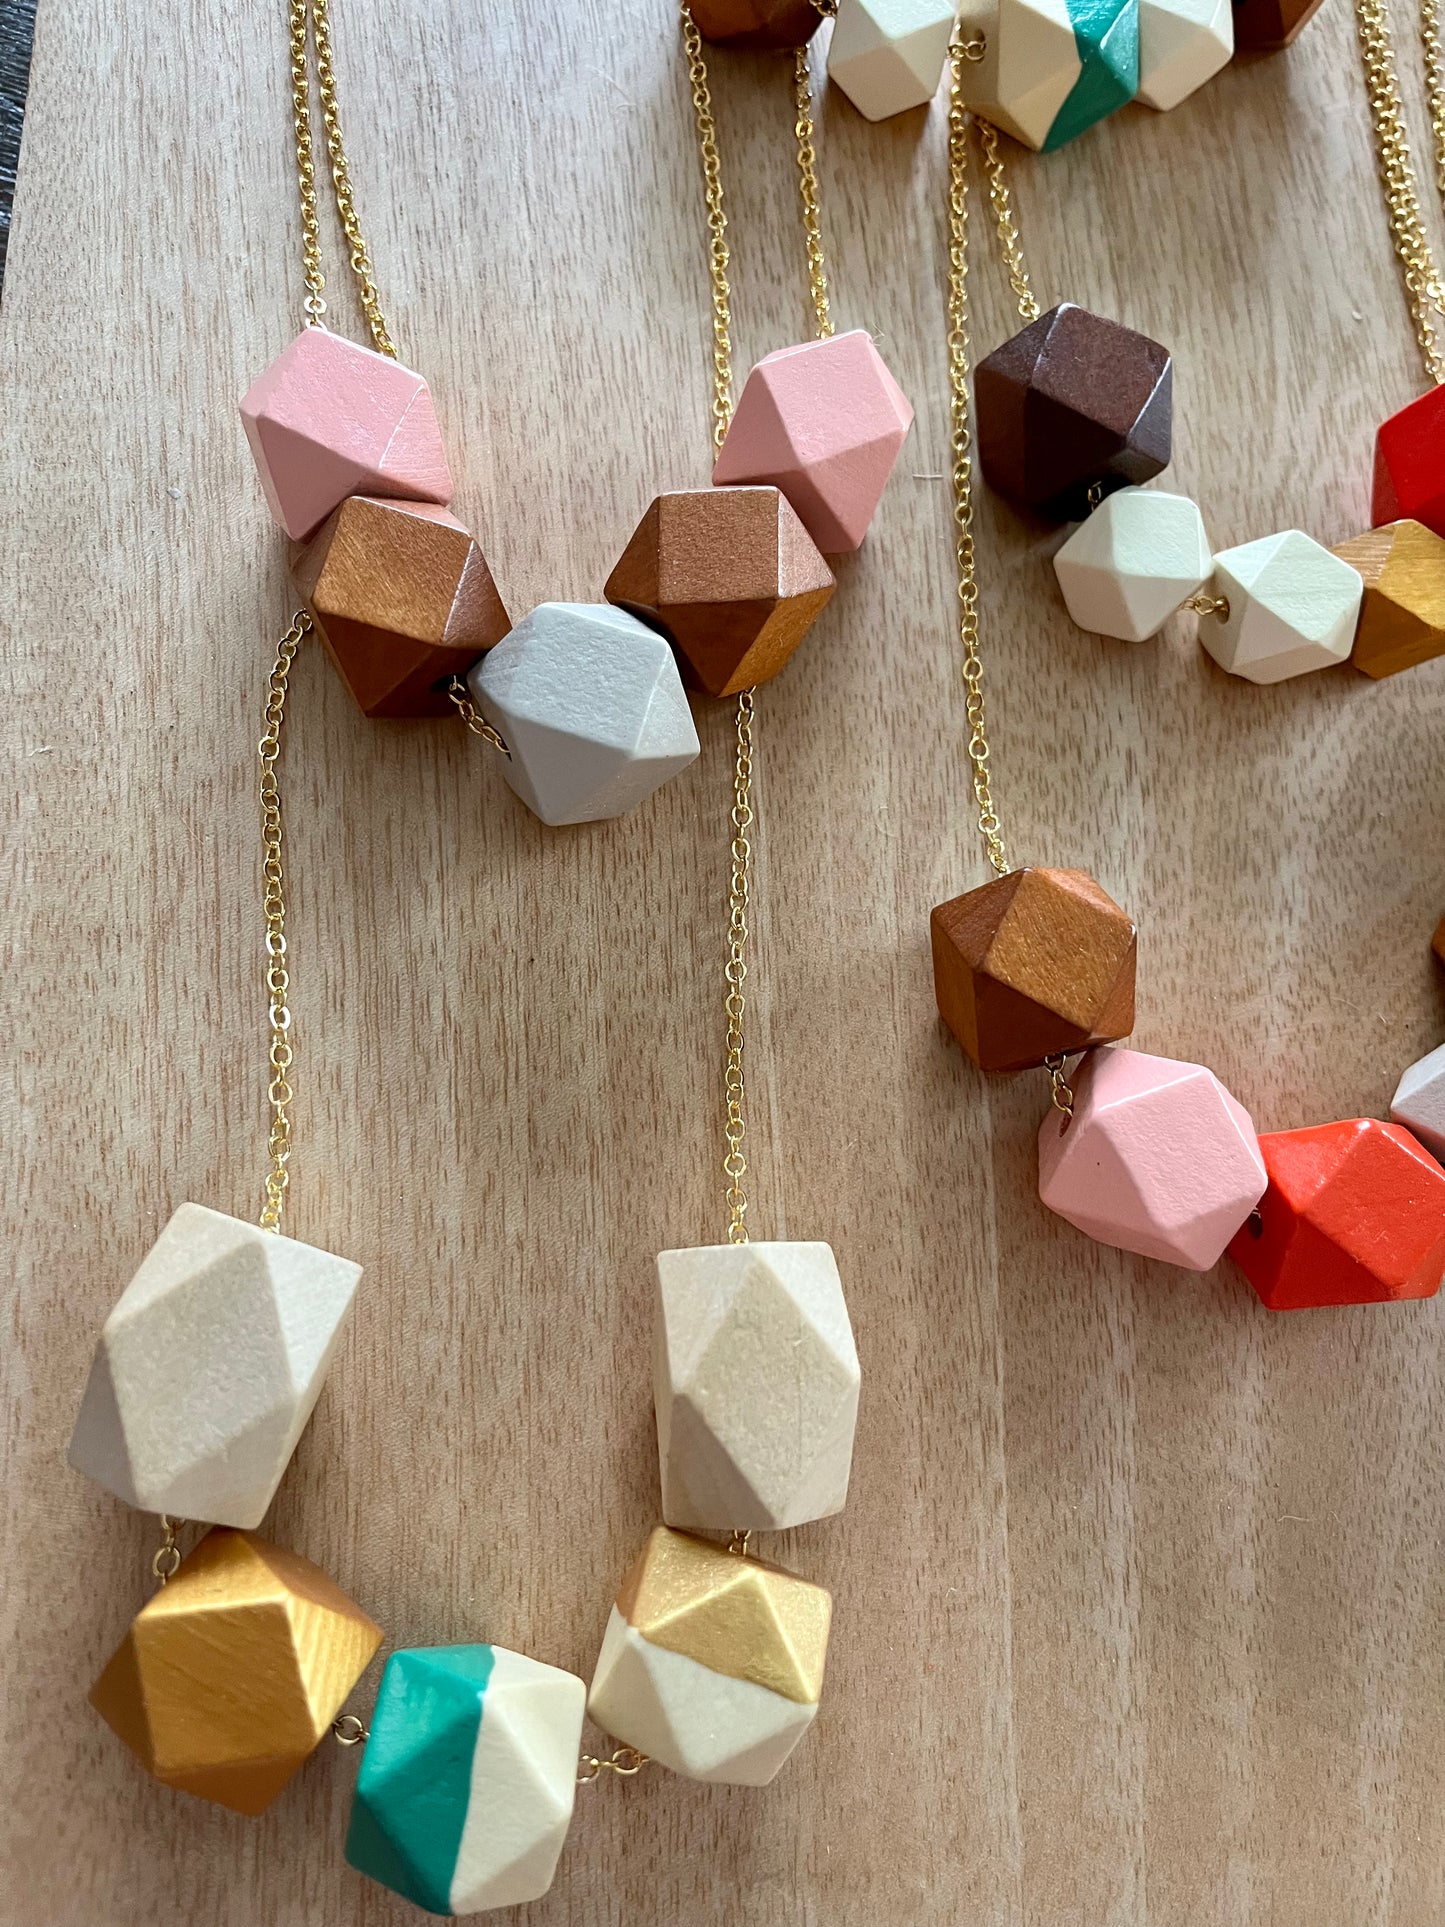 Handmade Wooden Geometric Statement Necklace With Gold Chain - The Harlow